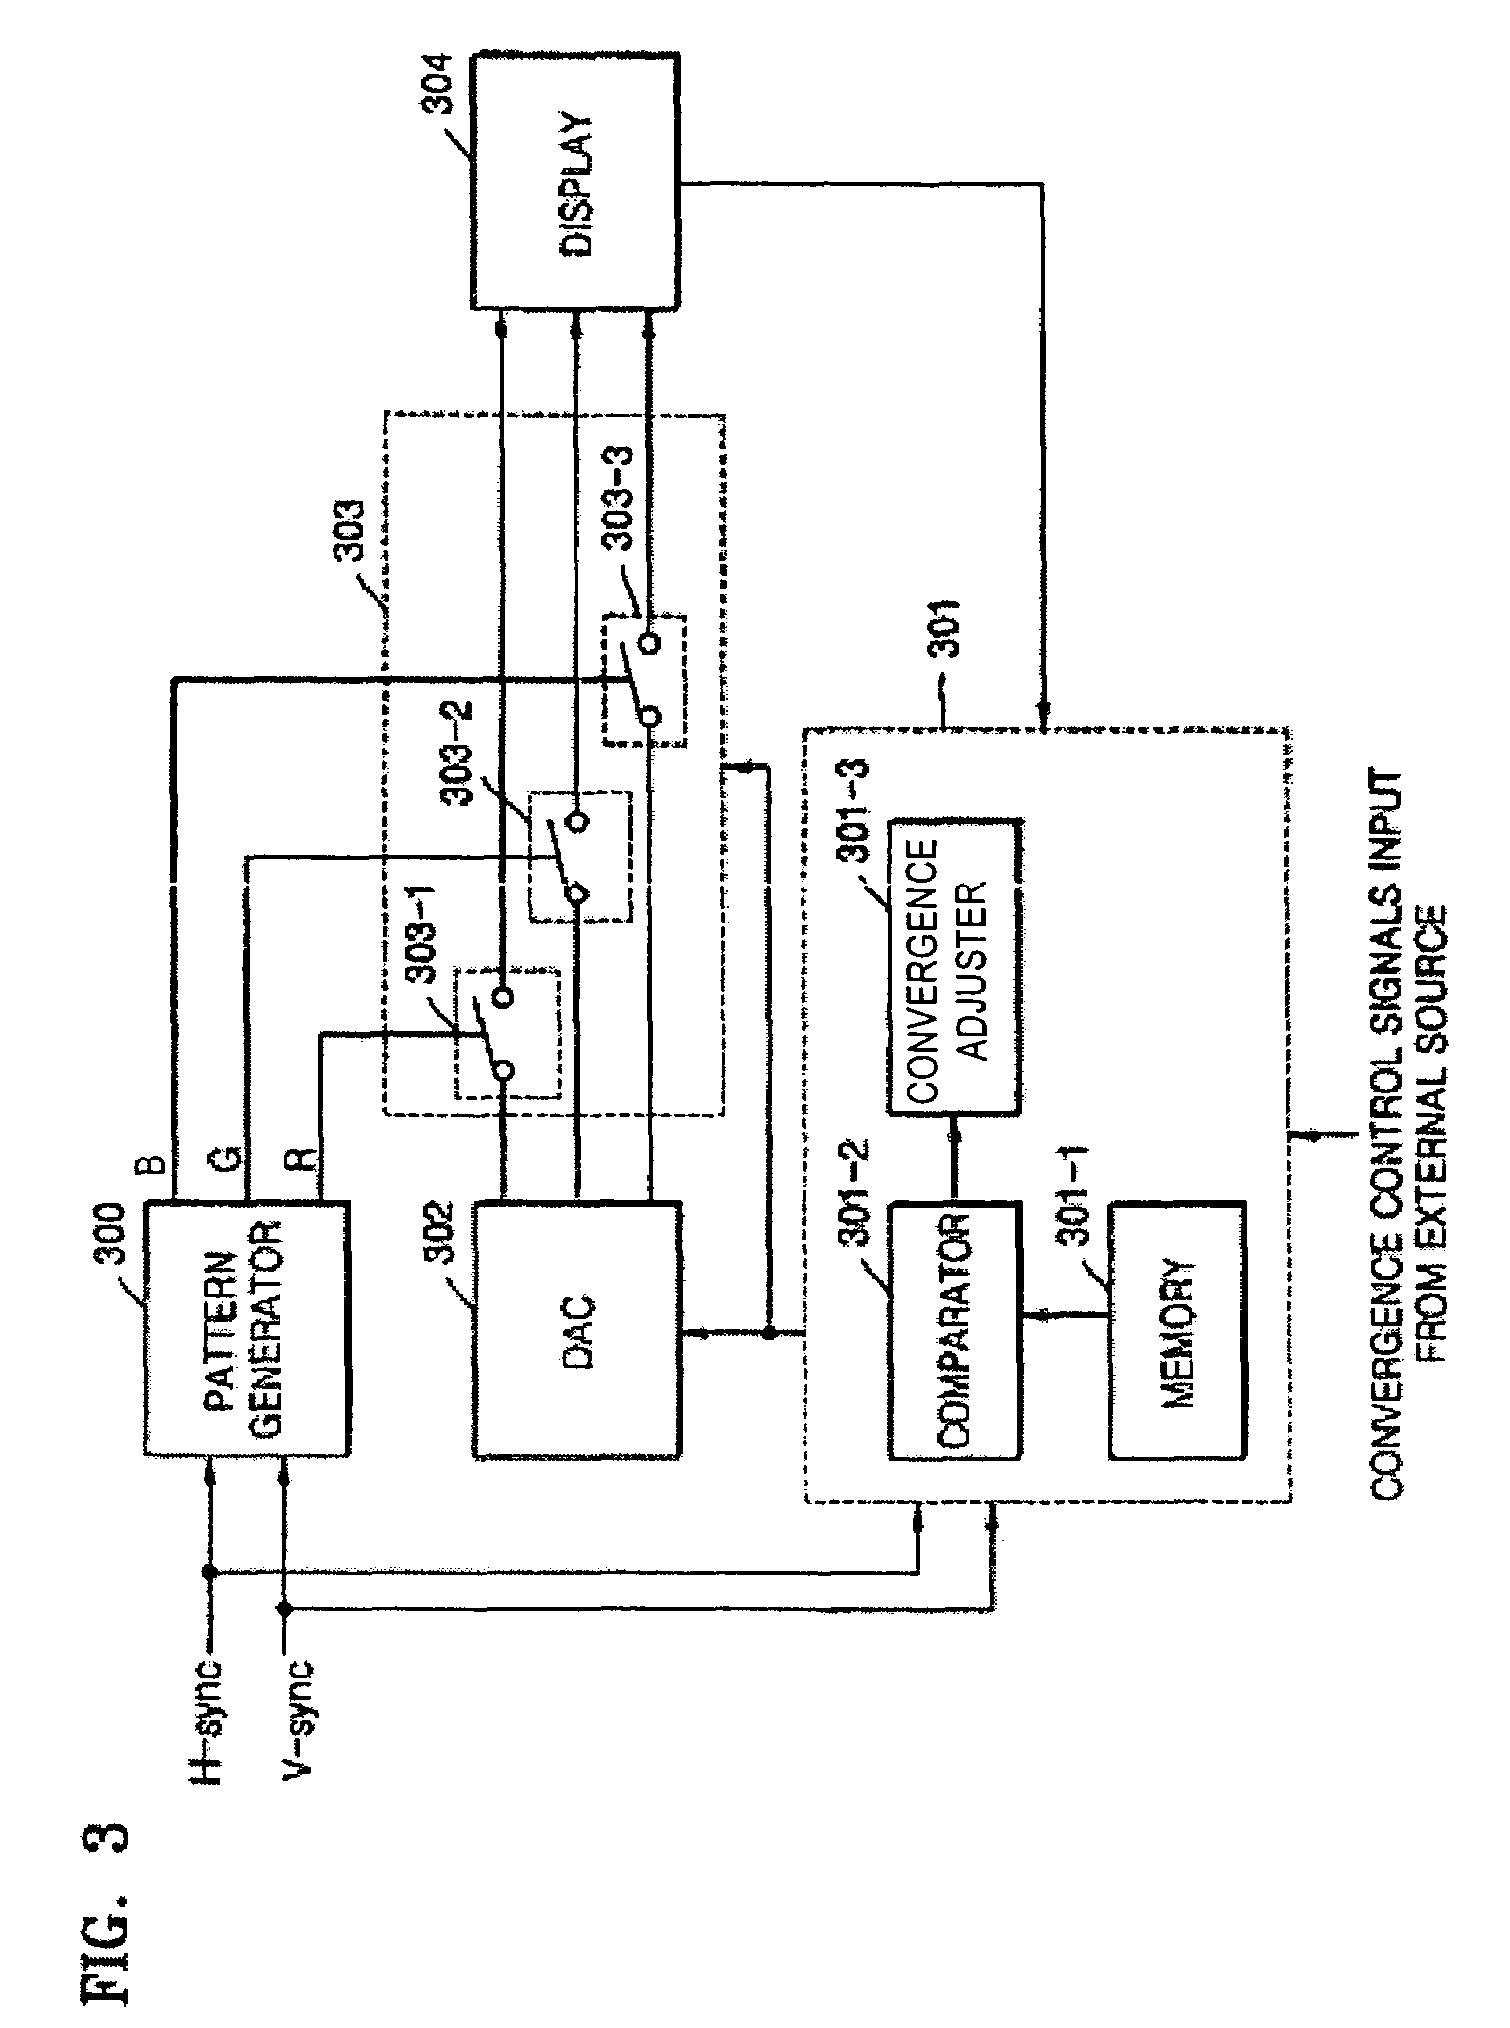 Apparatus and method for controlling convergence of projection television